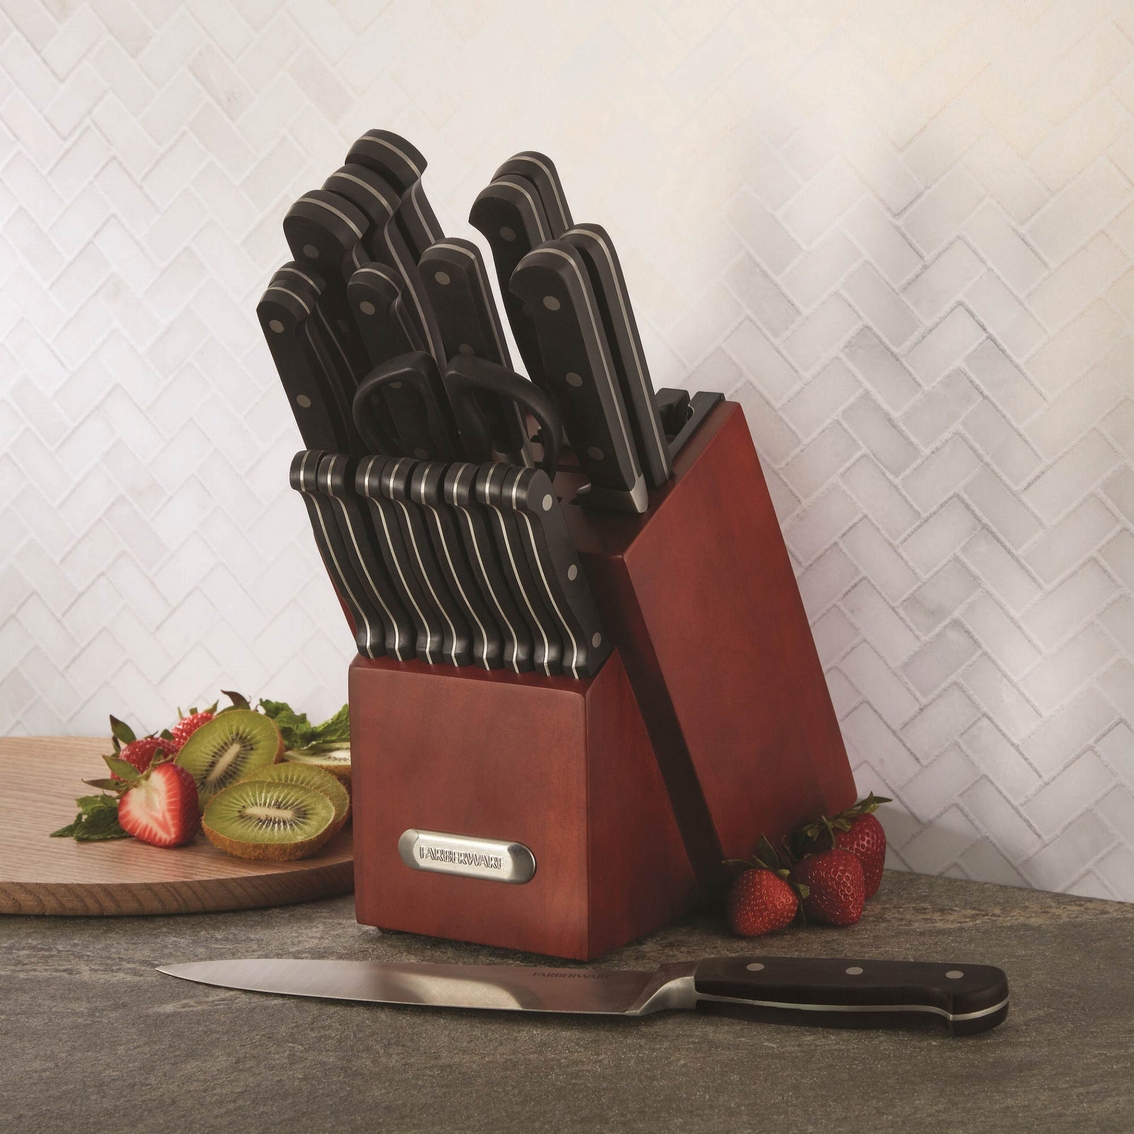 Farberware 21 pc. Forged Triple Riveted Cutlery Set - Image 4 of 4